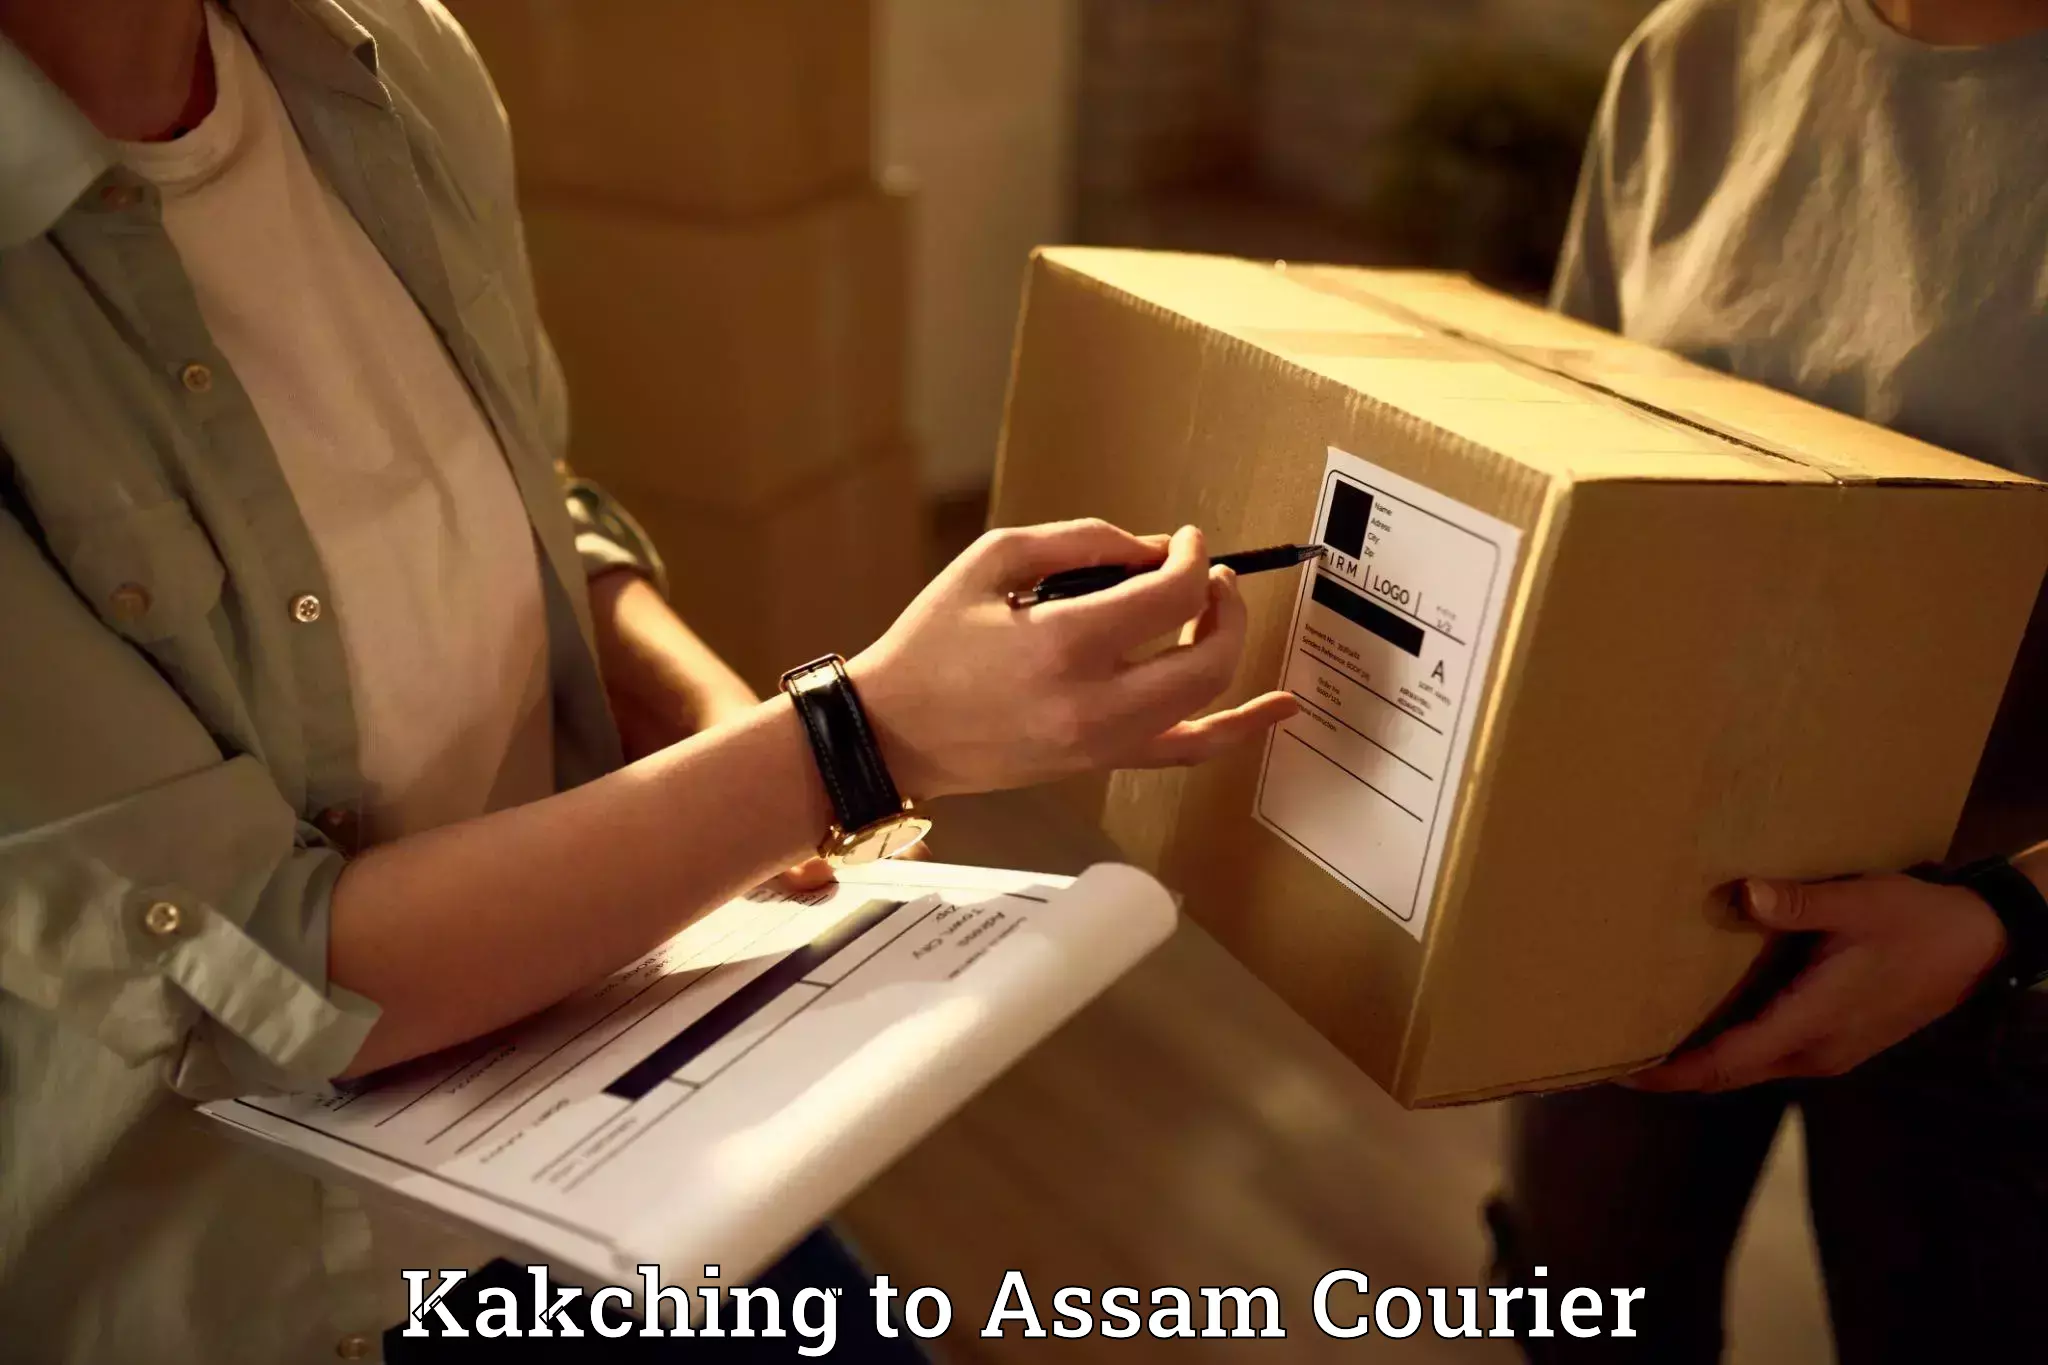 Furniture transport specialists Kakching to Assam